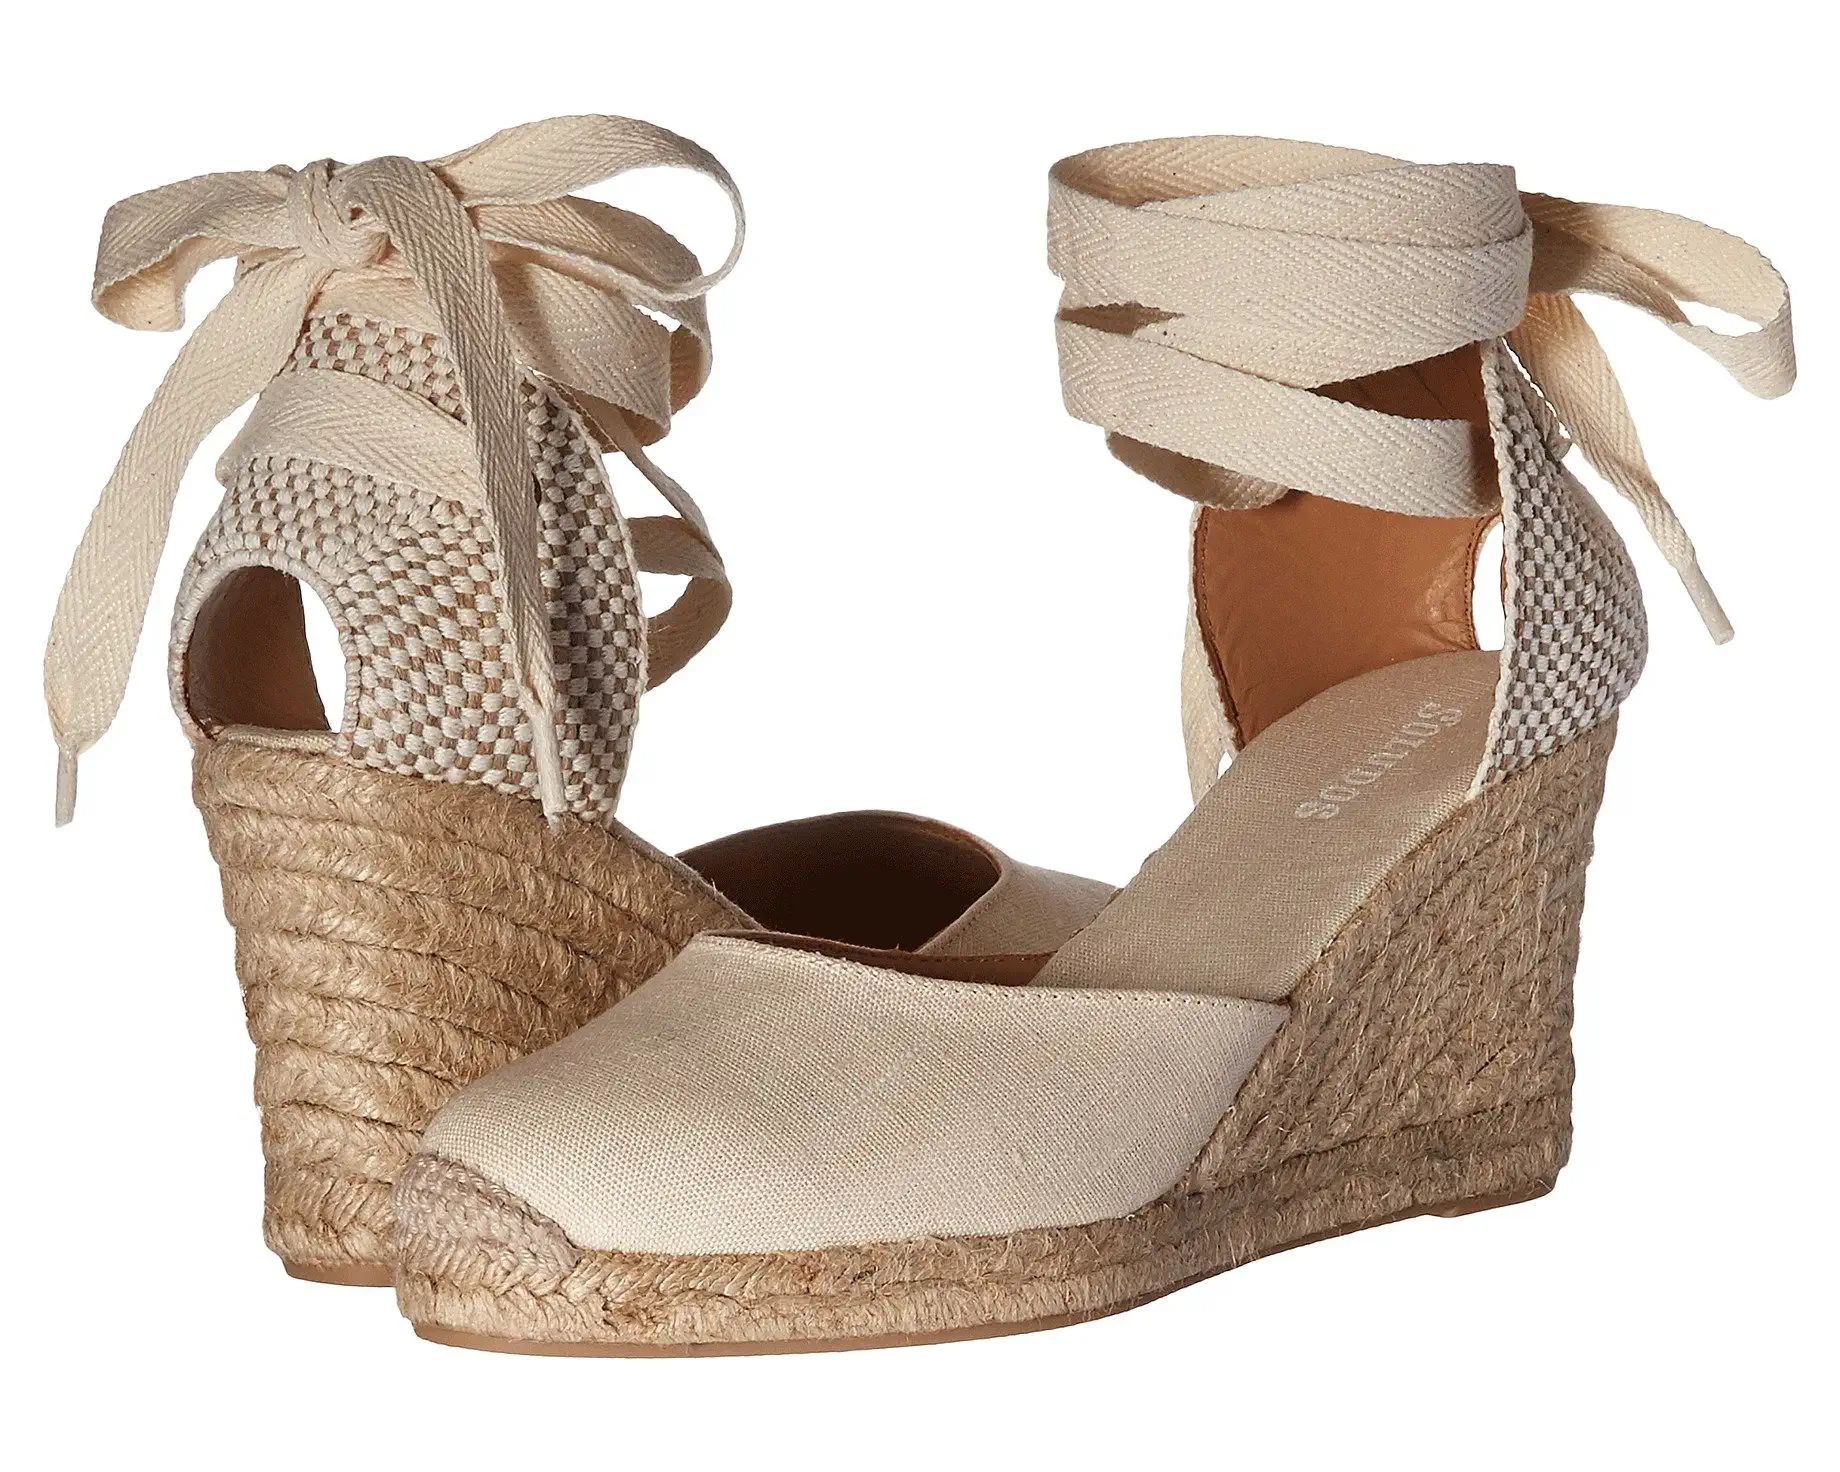 Soludos Classic Tall Wedge | Zappos